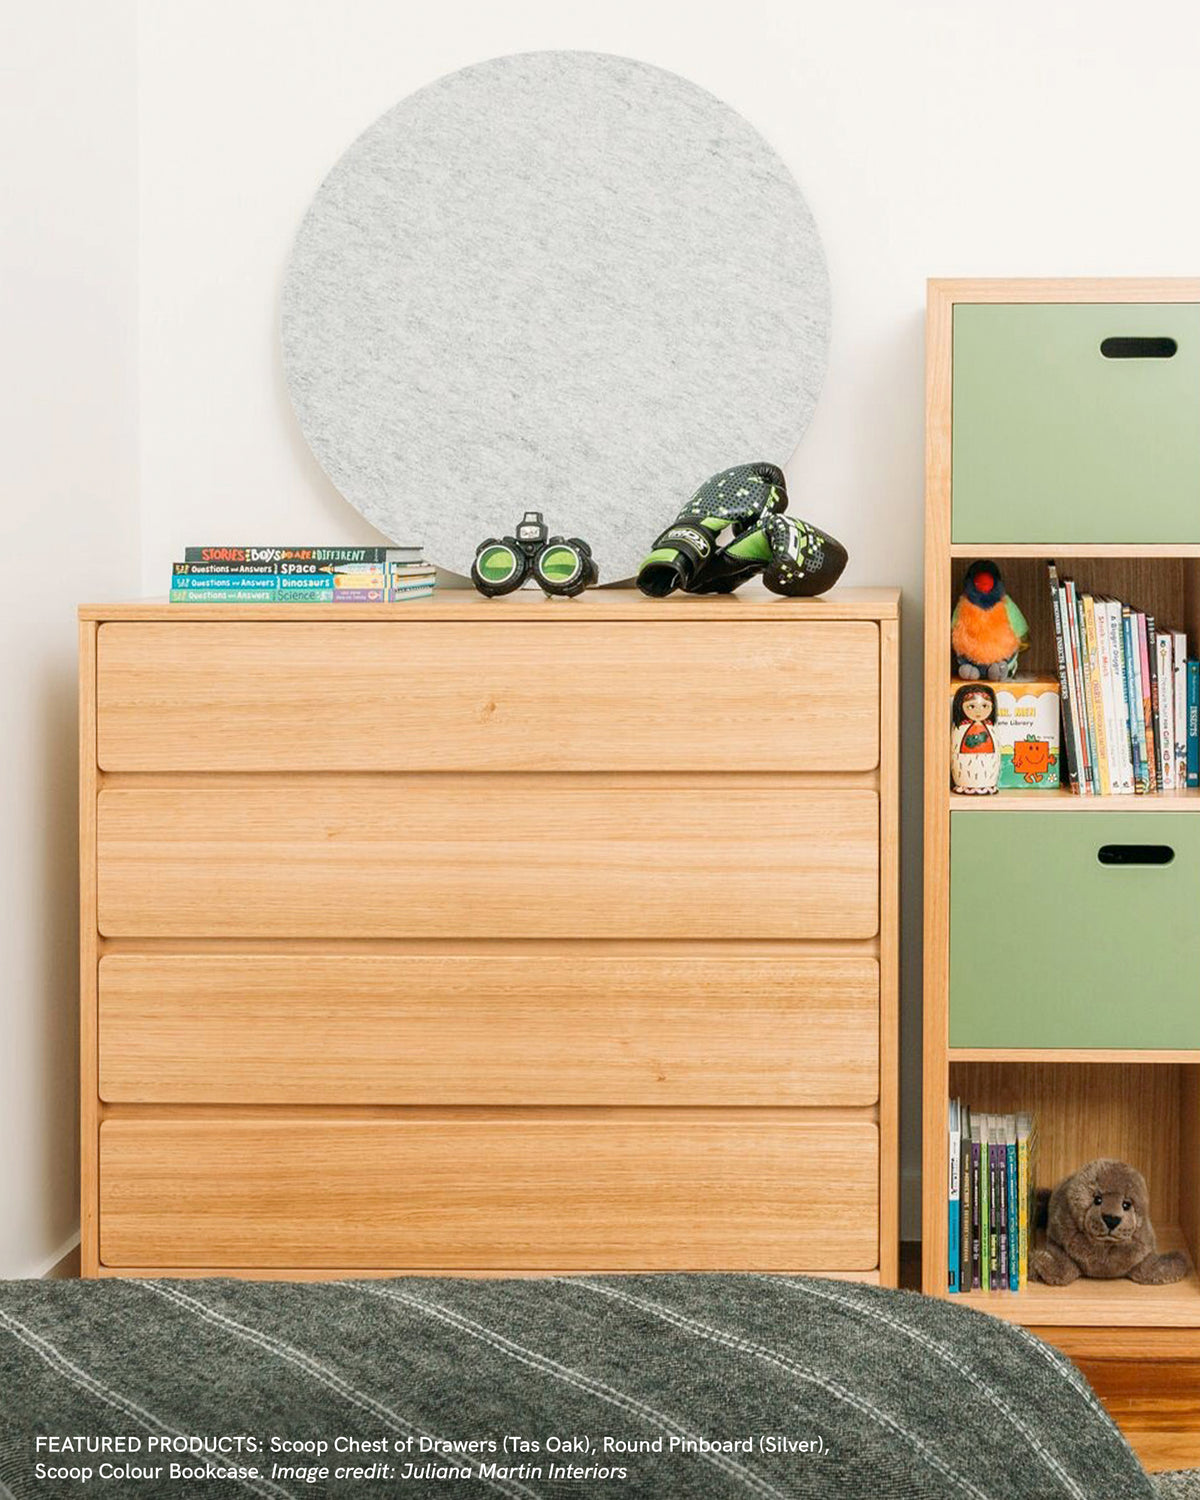 SCOOP CHEST OF DRAWERS